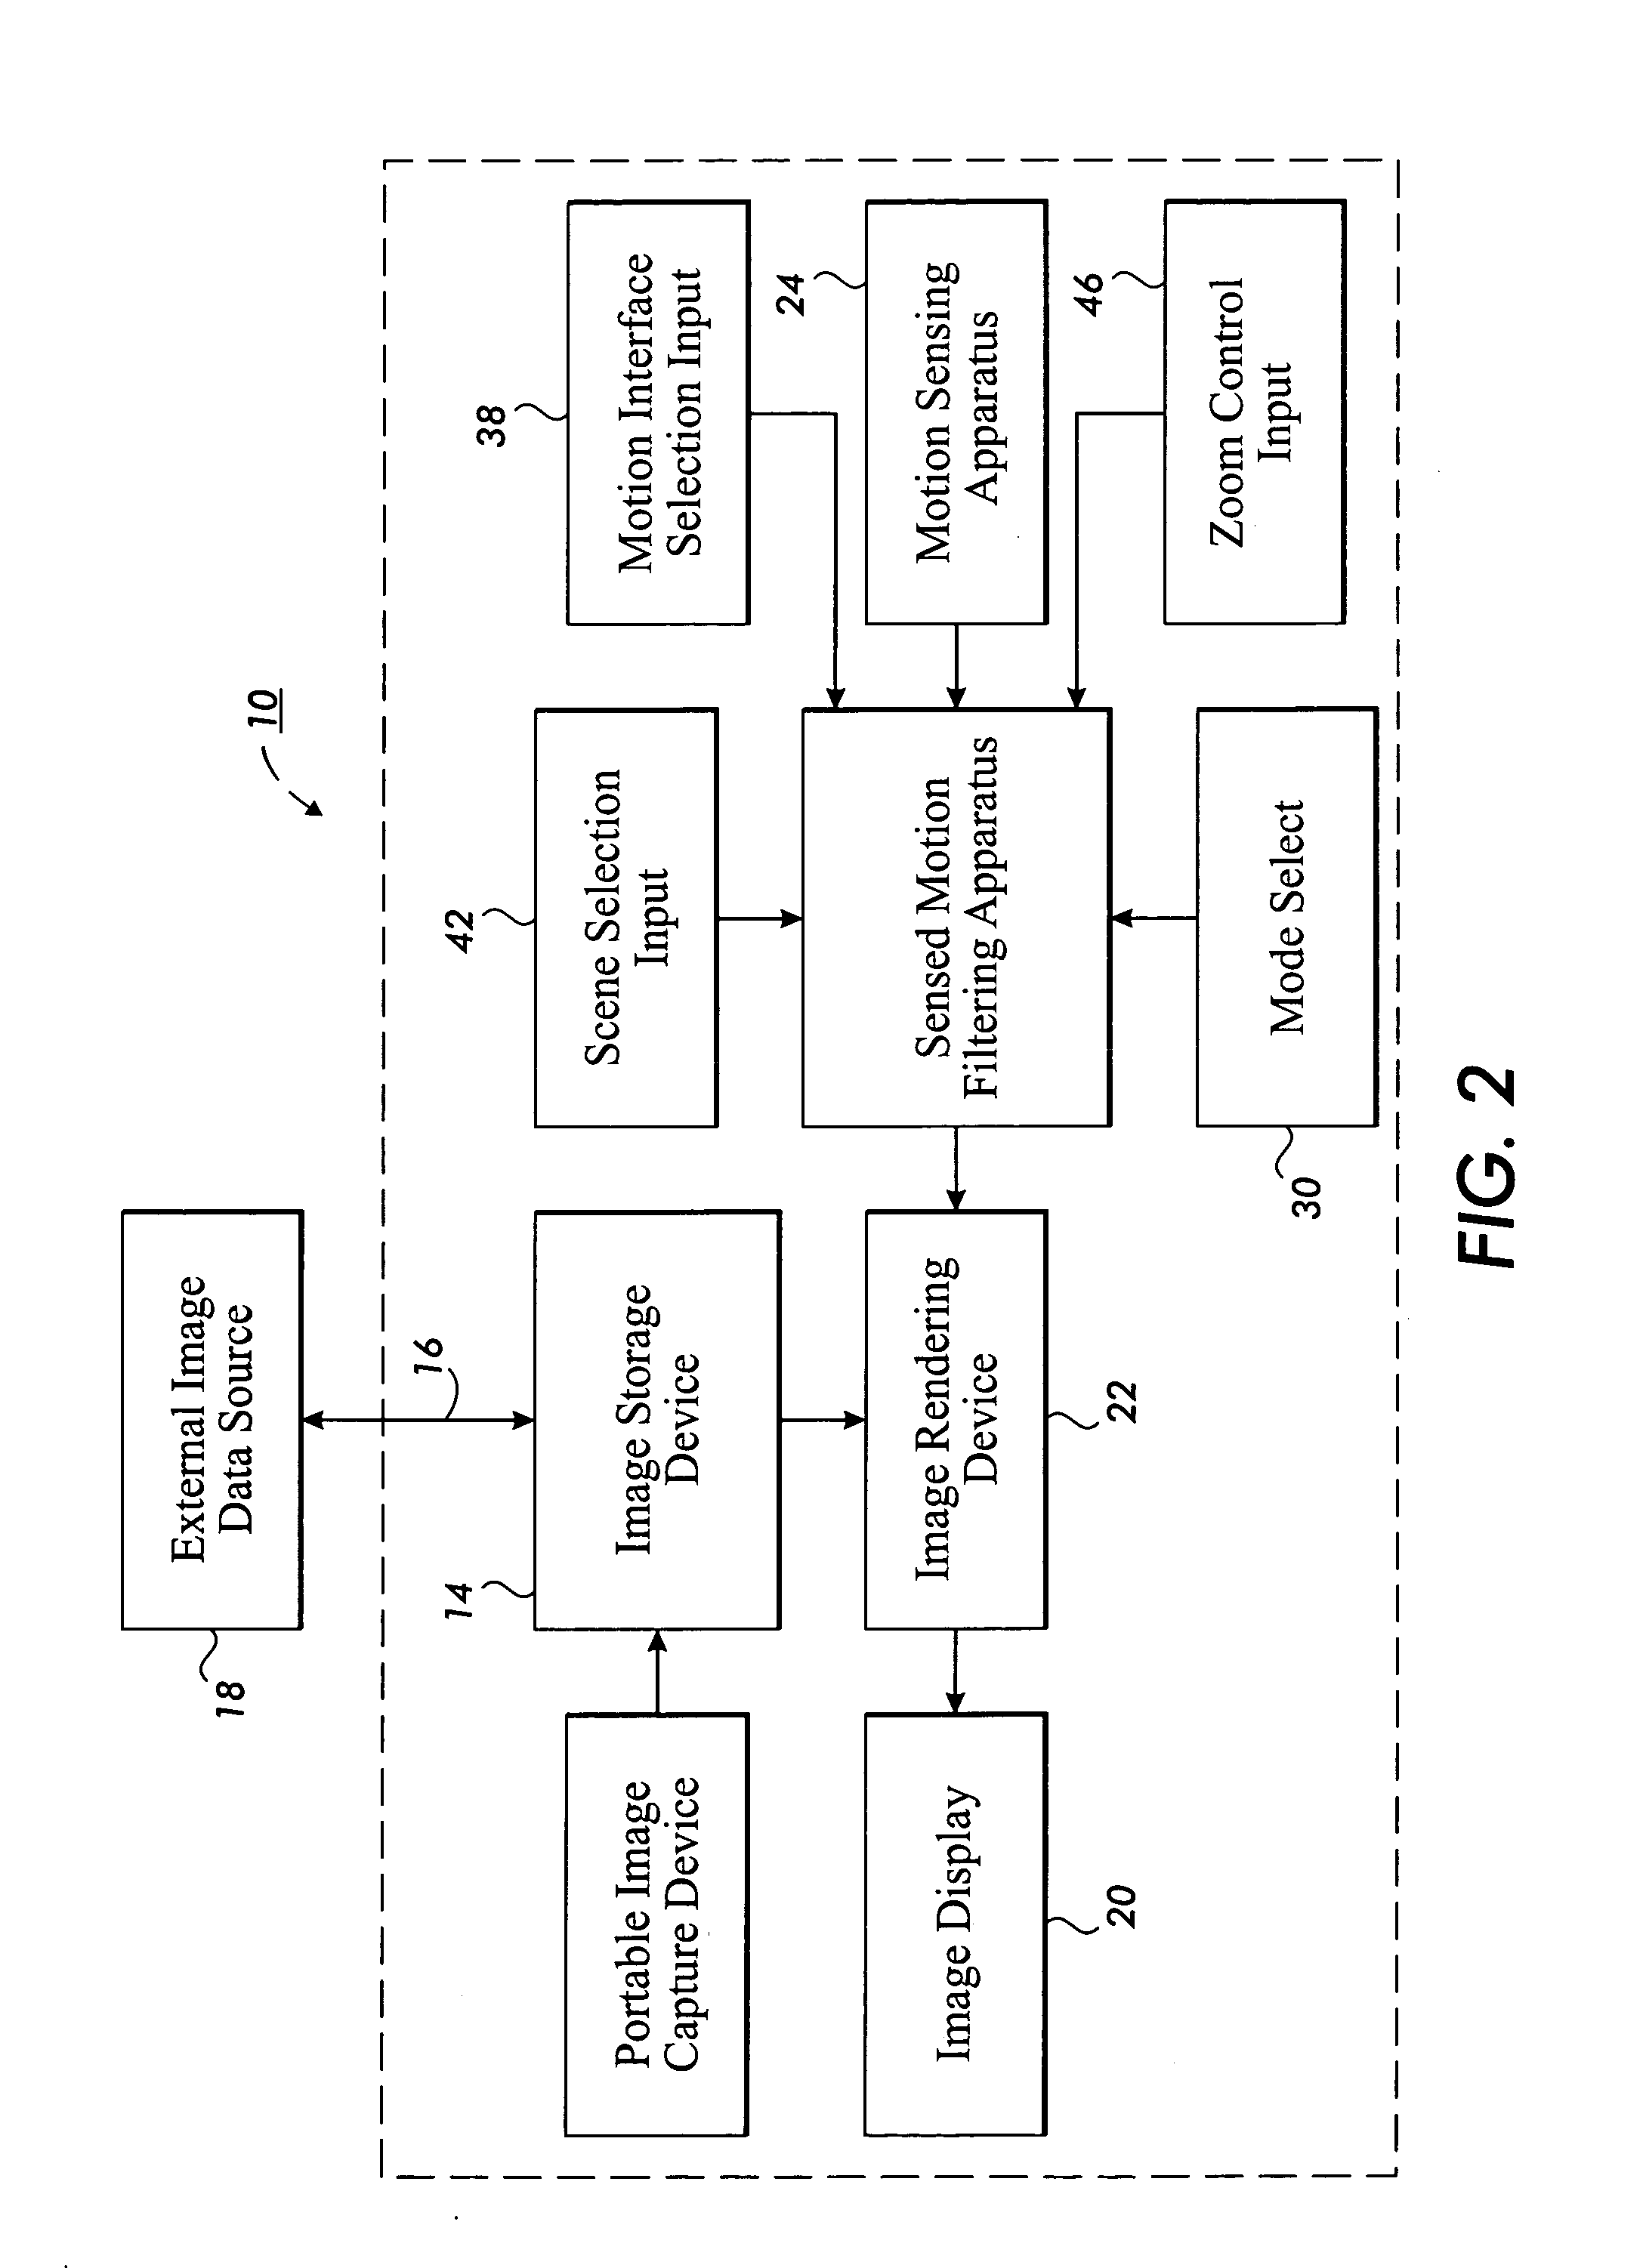 Display device for a camera